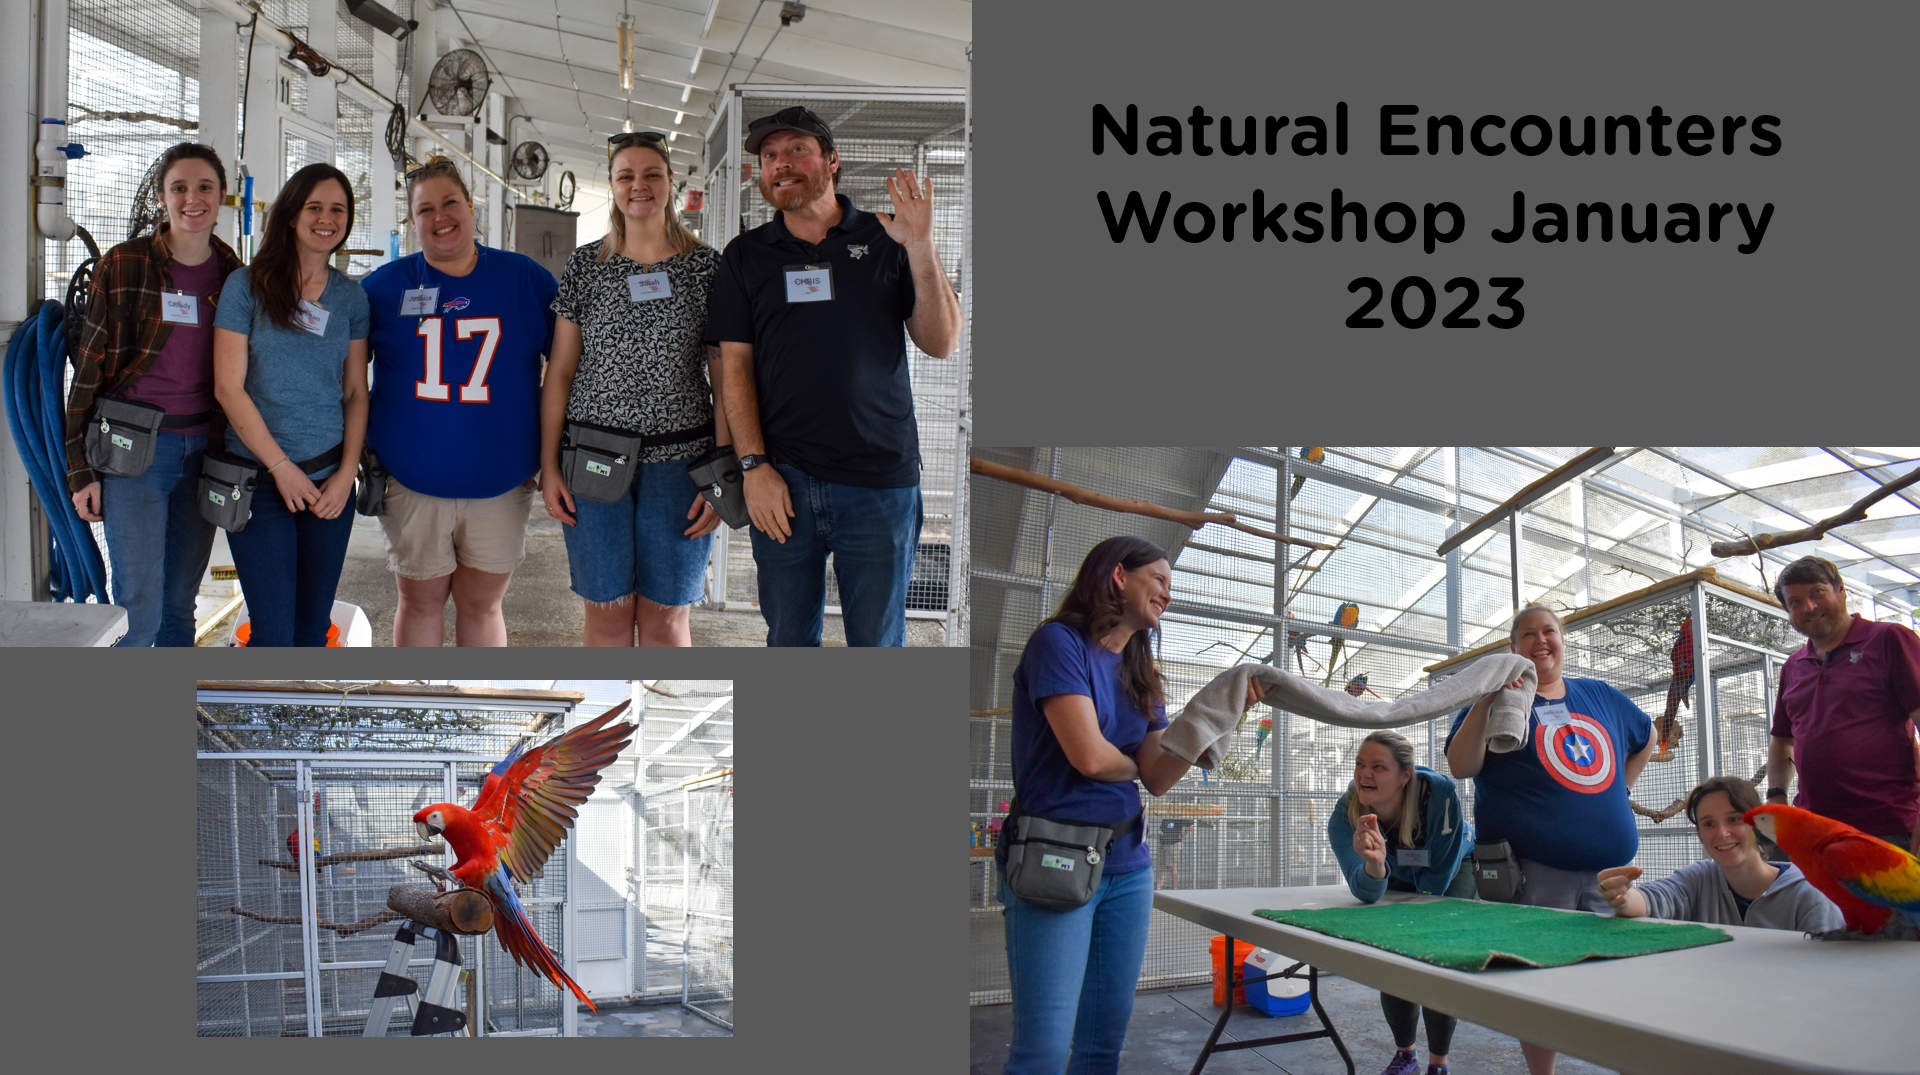 Animal Training Workshop Experience With Natural Encounters Inc.